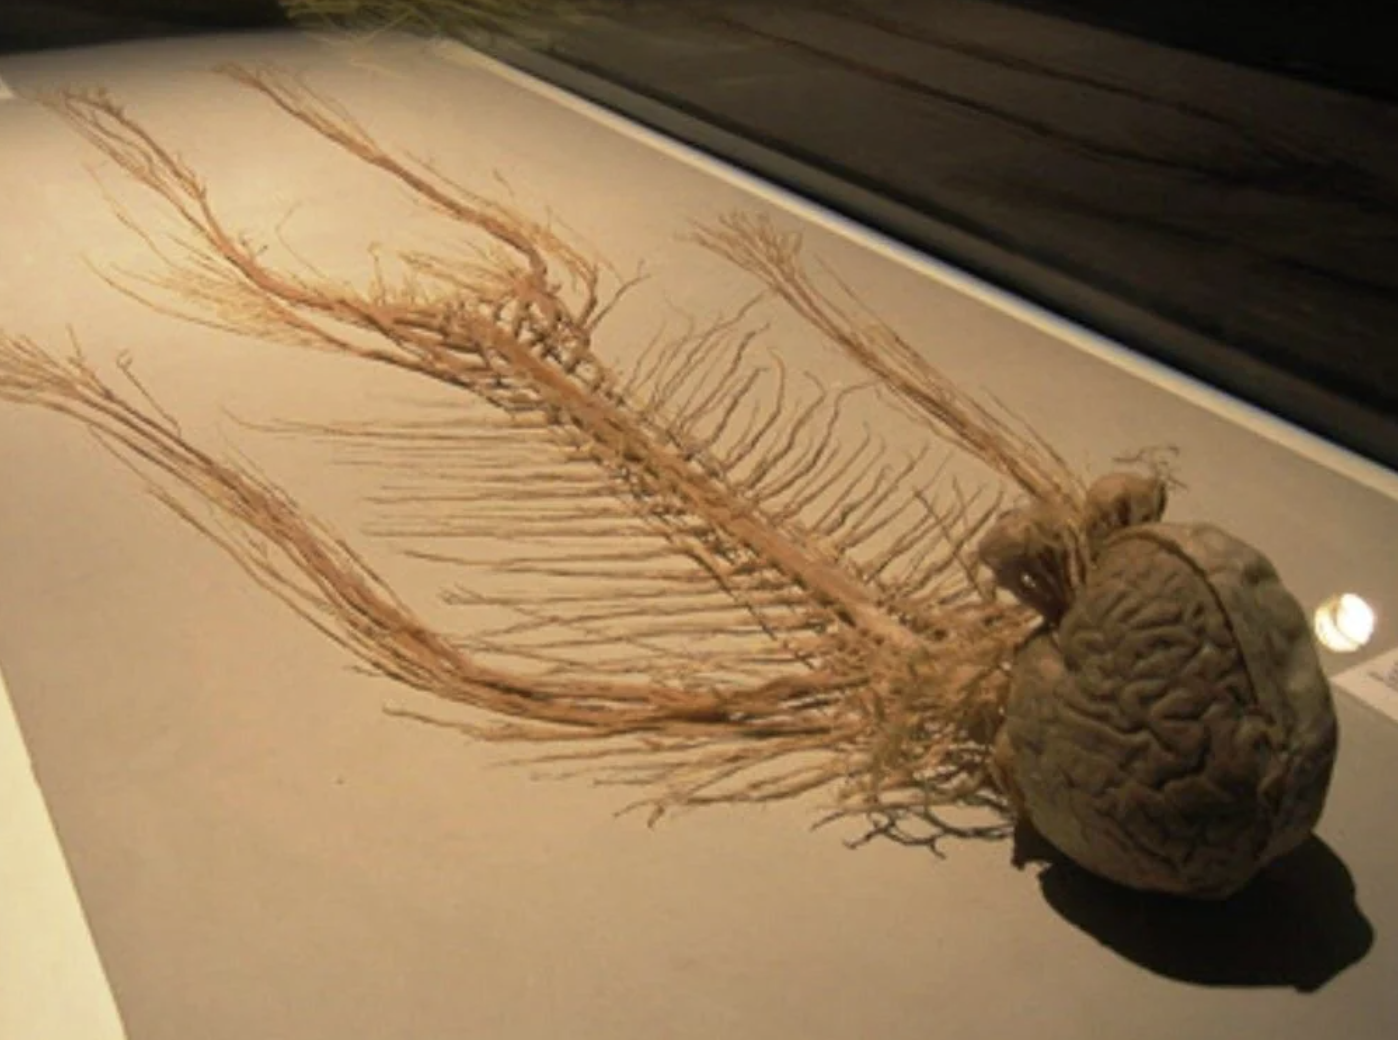 brain and veins replica laid out flat on a table